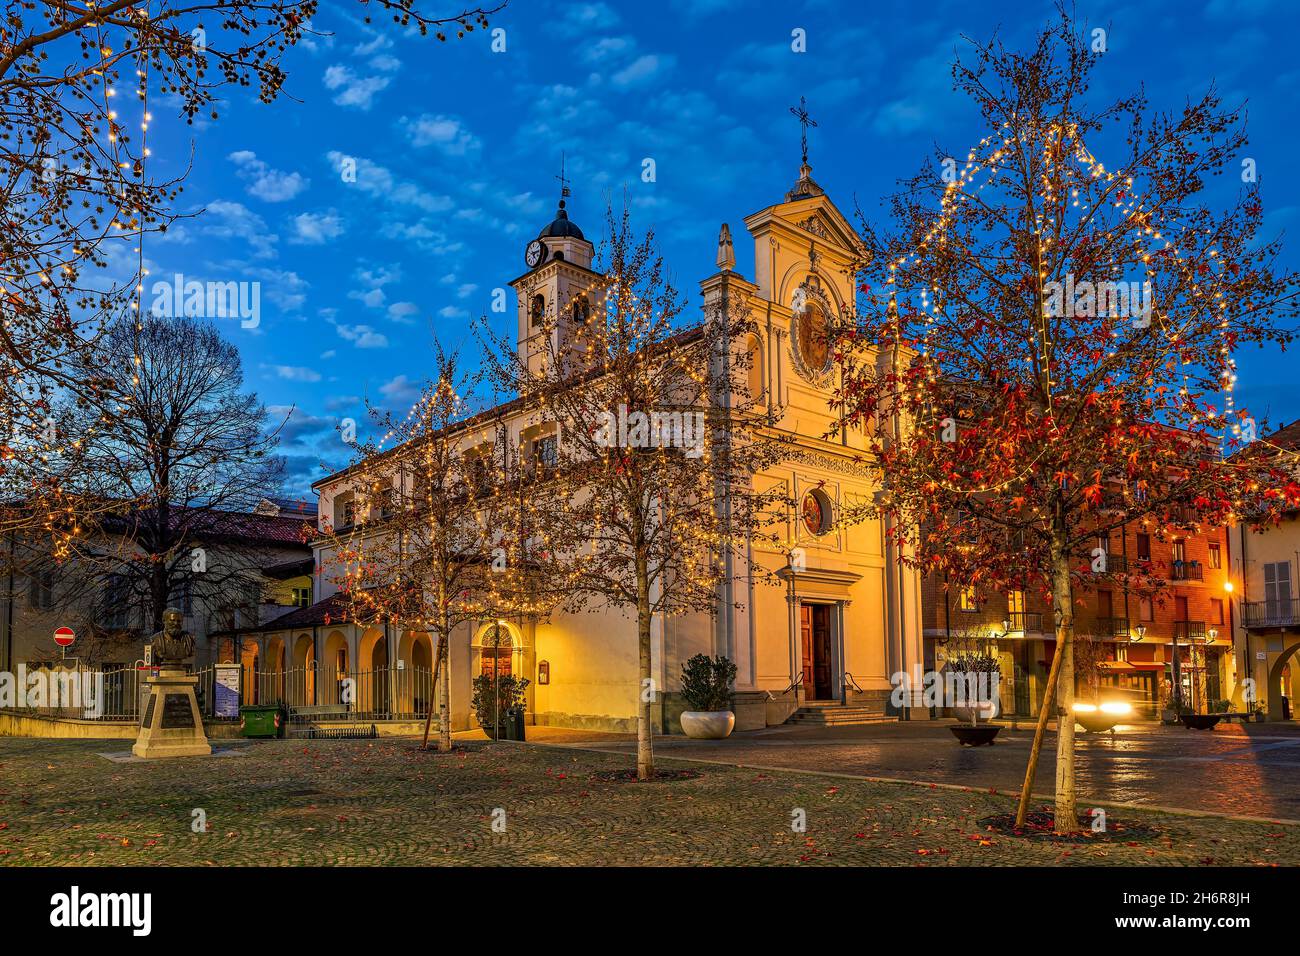 Catholic church on small town square in the evening surrounded by the trees with Christmas lights in Alba, Piedmont, Northern Italy. Stock Photo